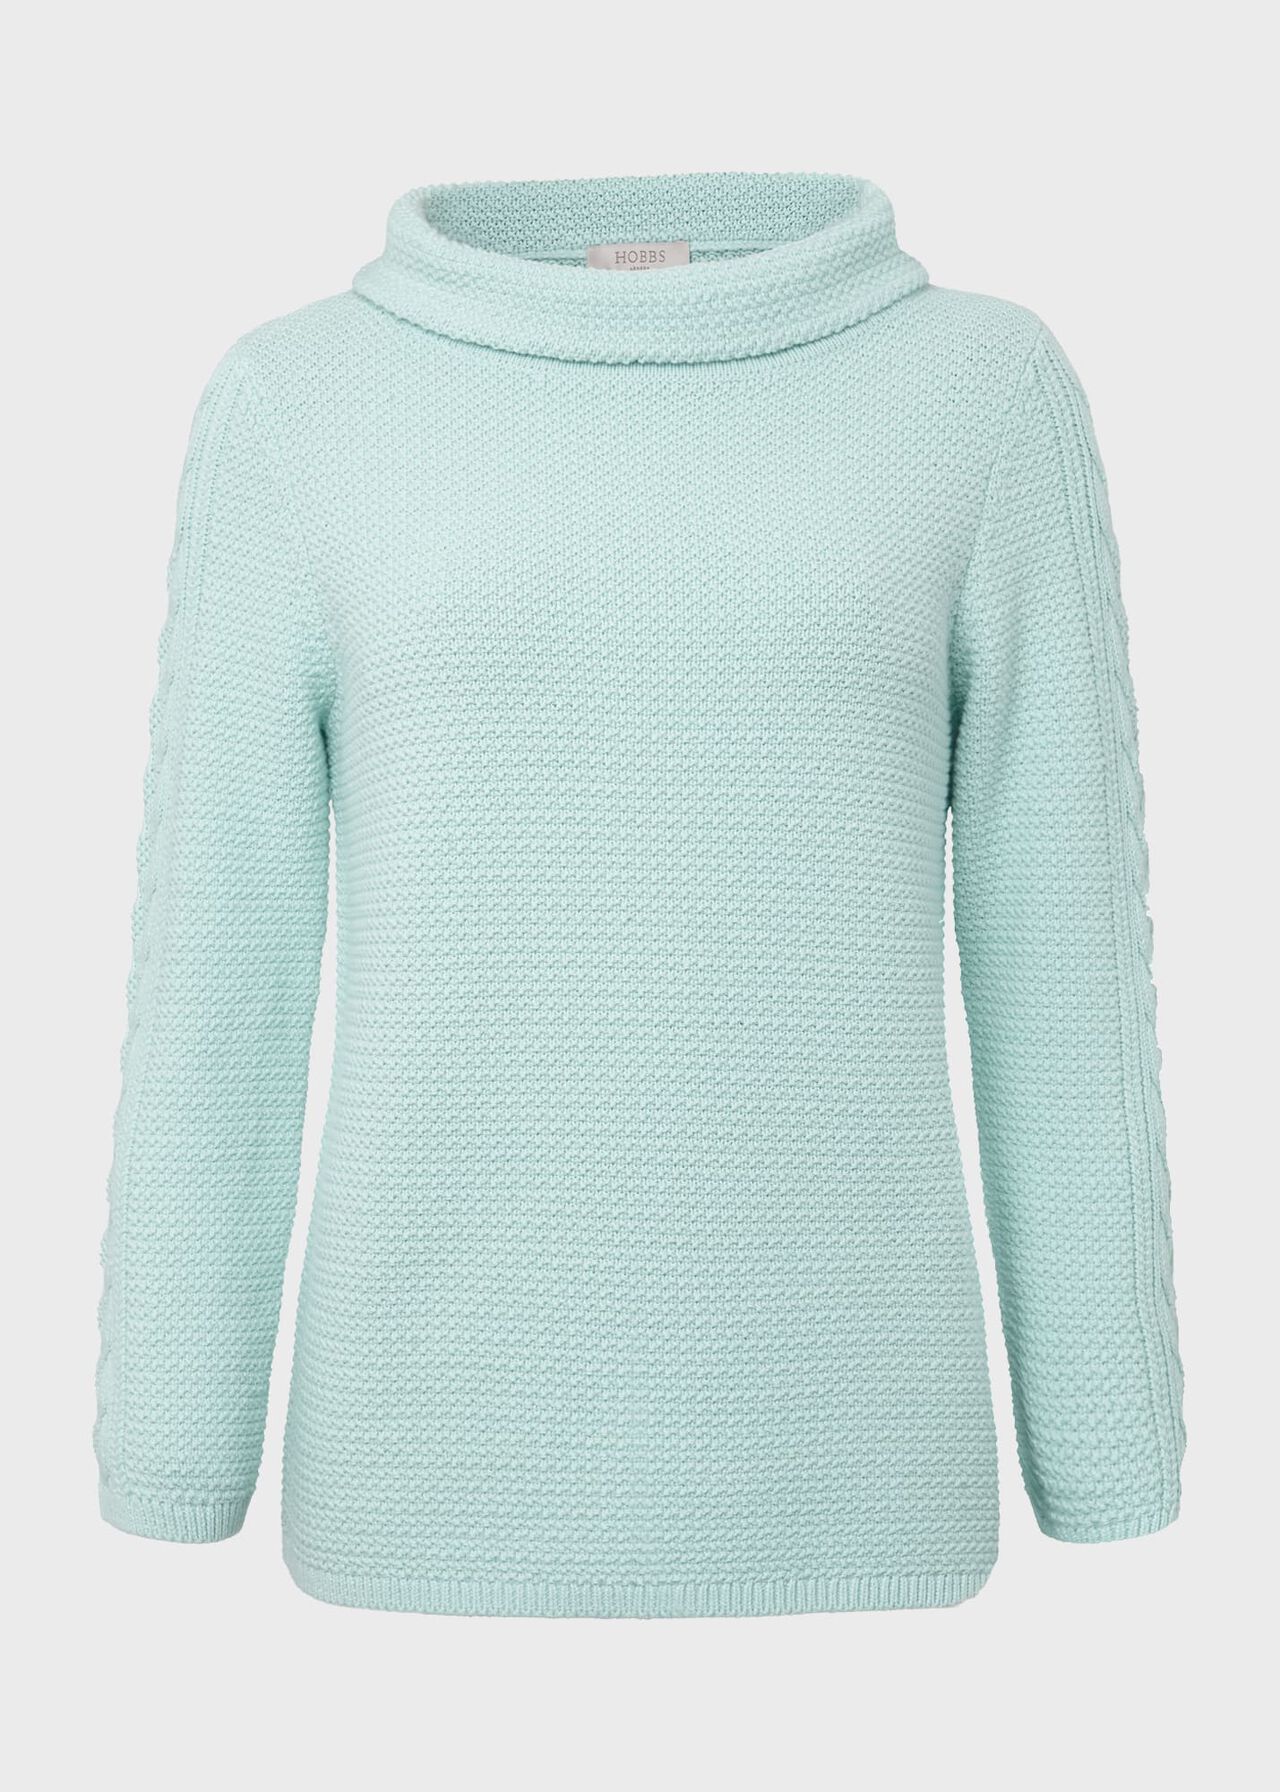 Camilla Cotton Jumper, Clearwater Blue, hi-res